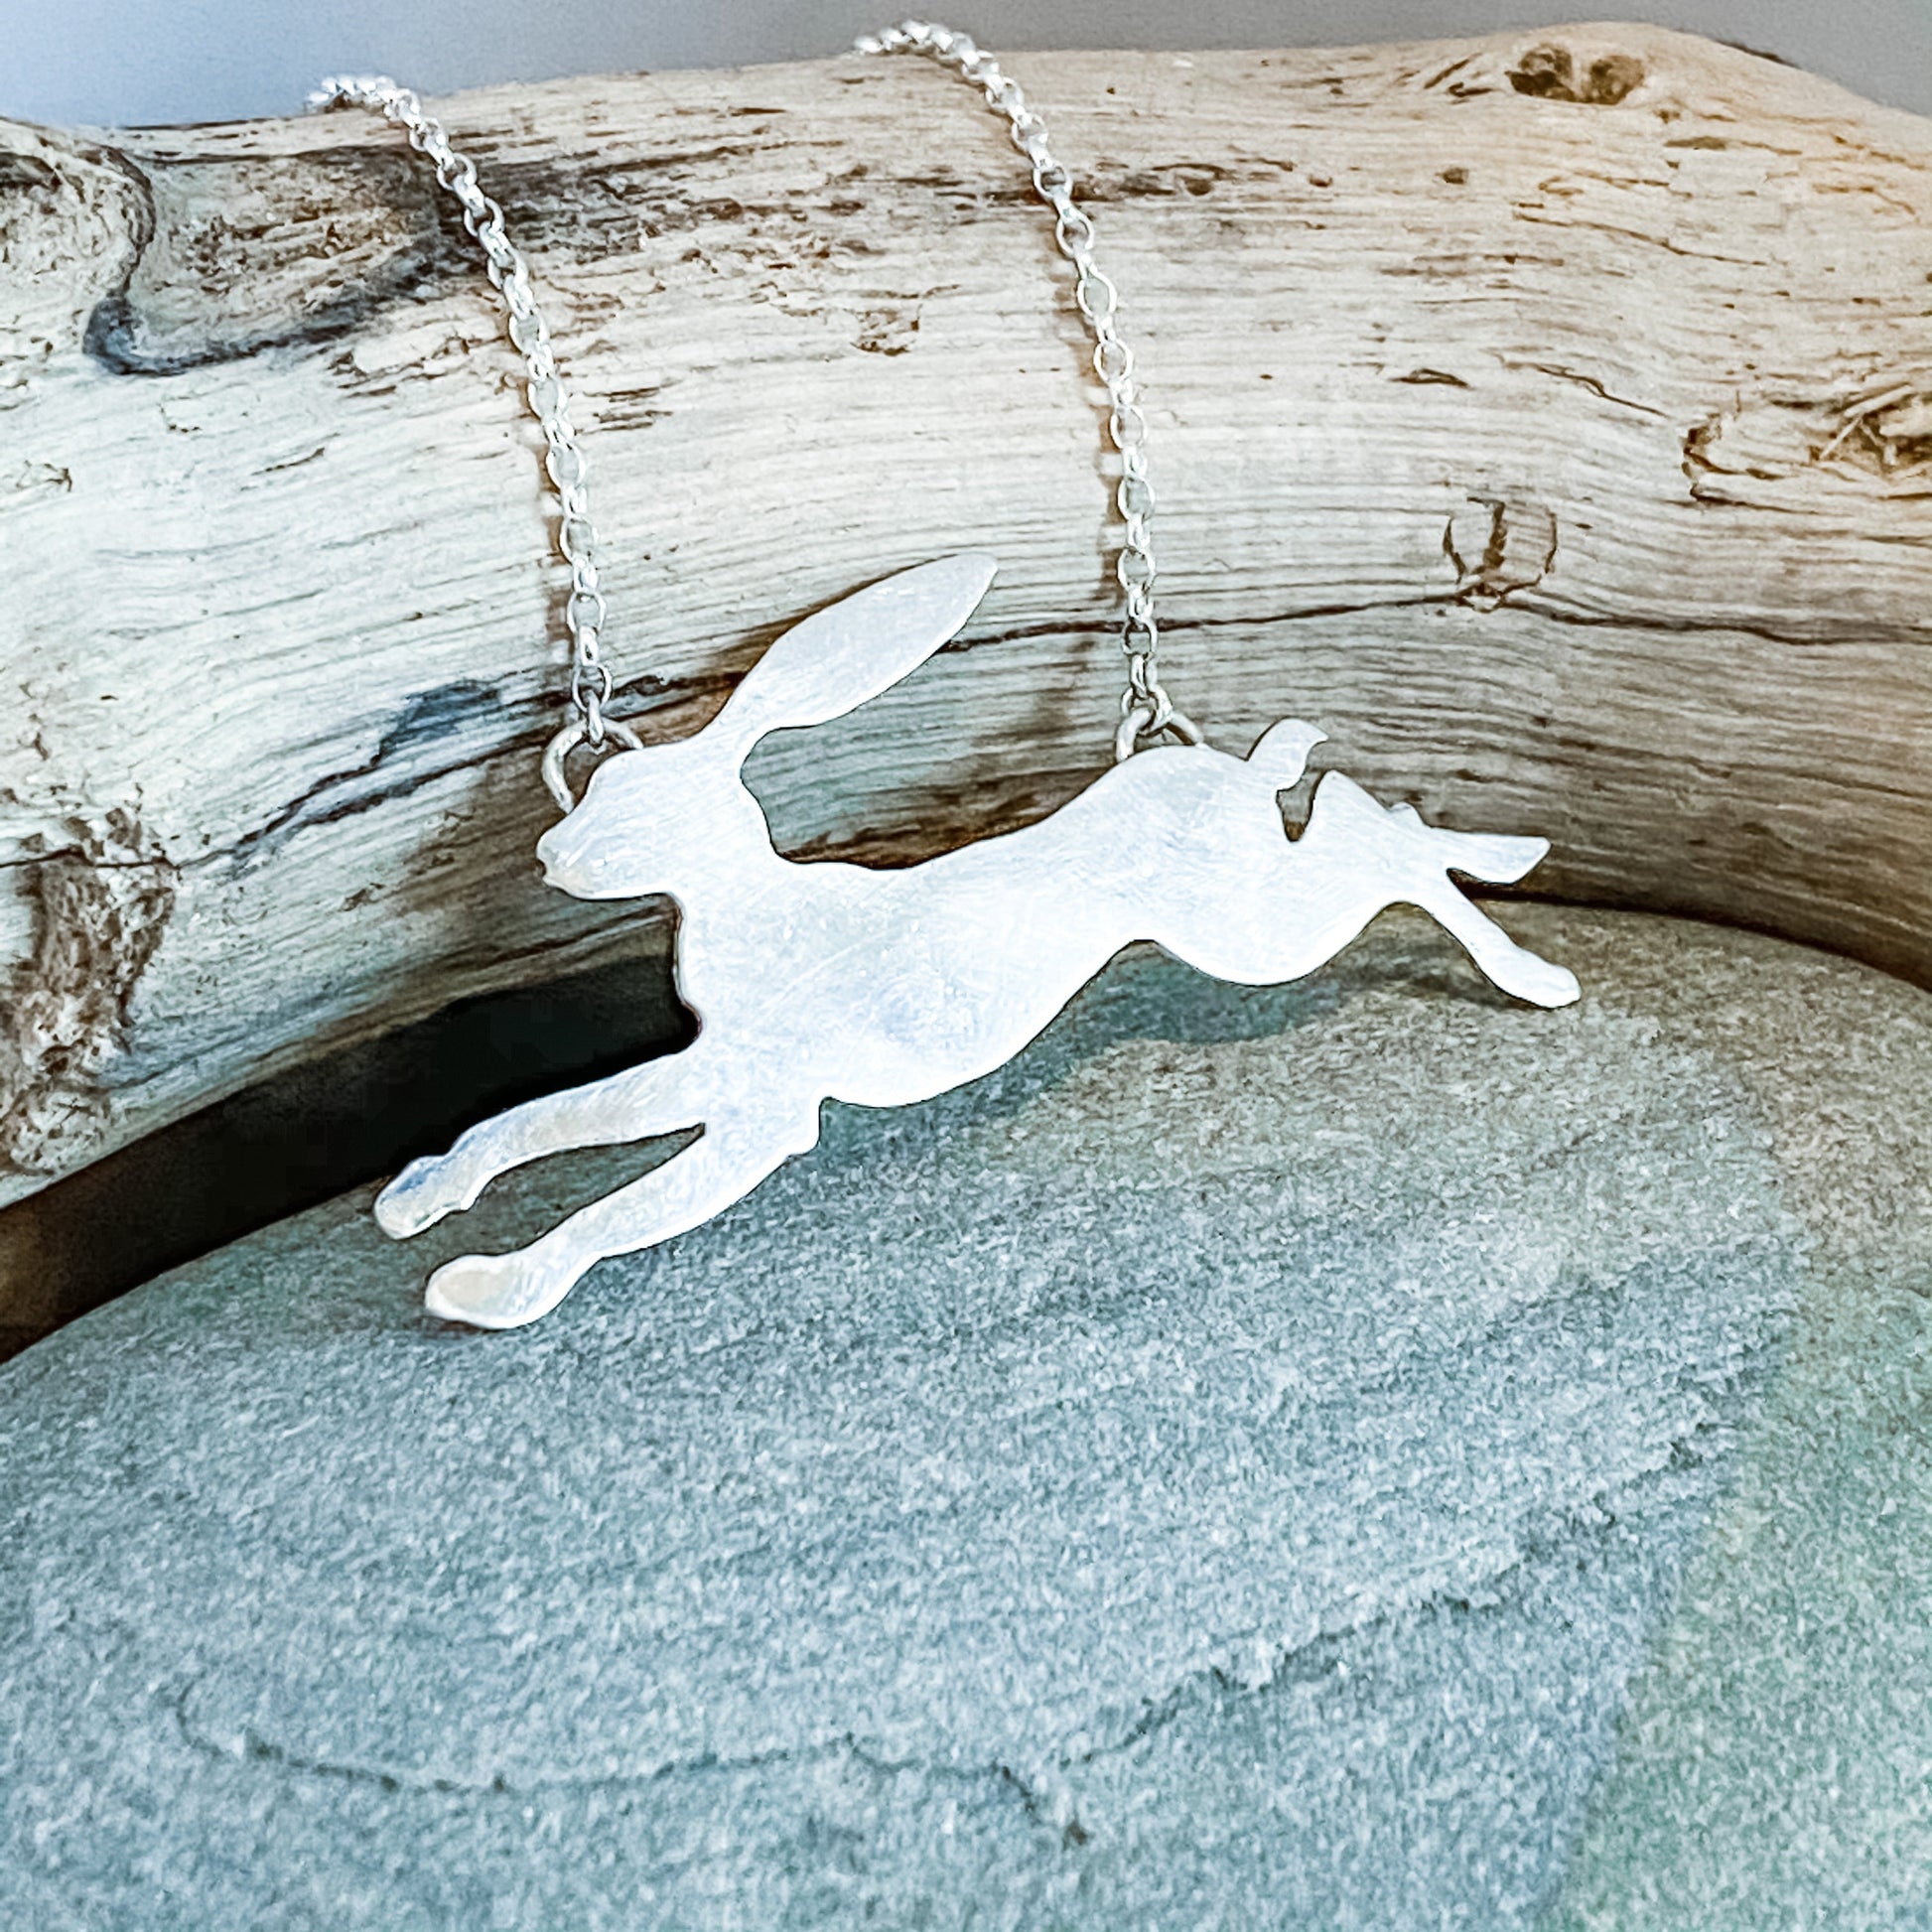 Leaping Hare, Necklace, Small Dog Silver